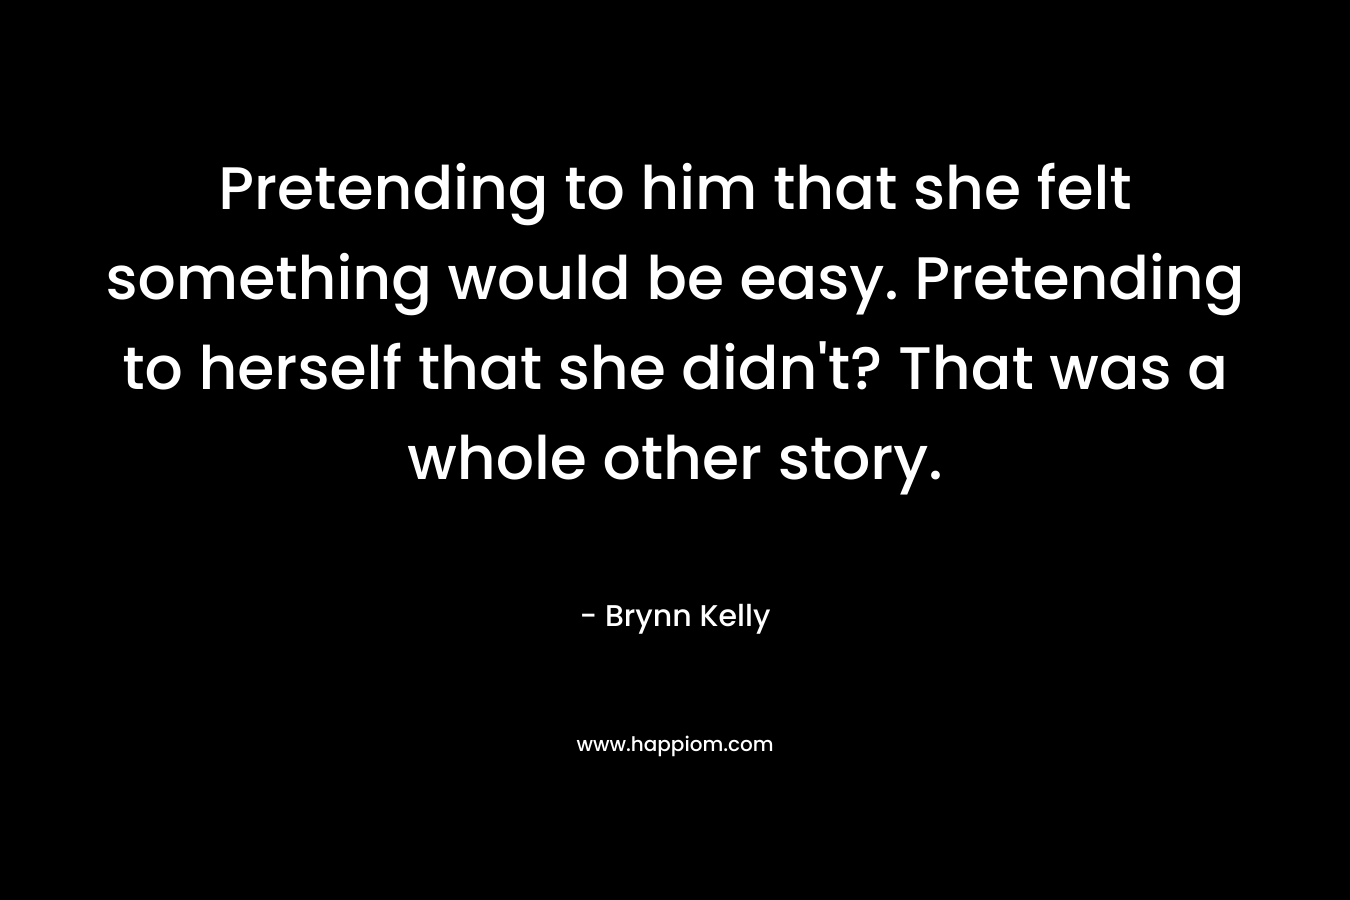 Pretending to him that she felt something would be easy. Pretending to herself that she didn’t? That was a whole other story. – Brynn Kelly